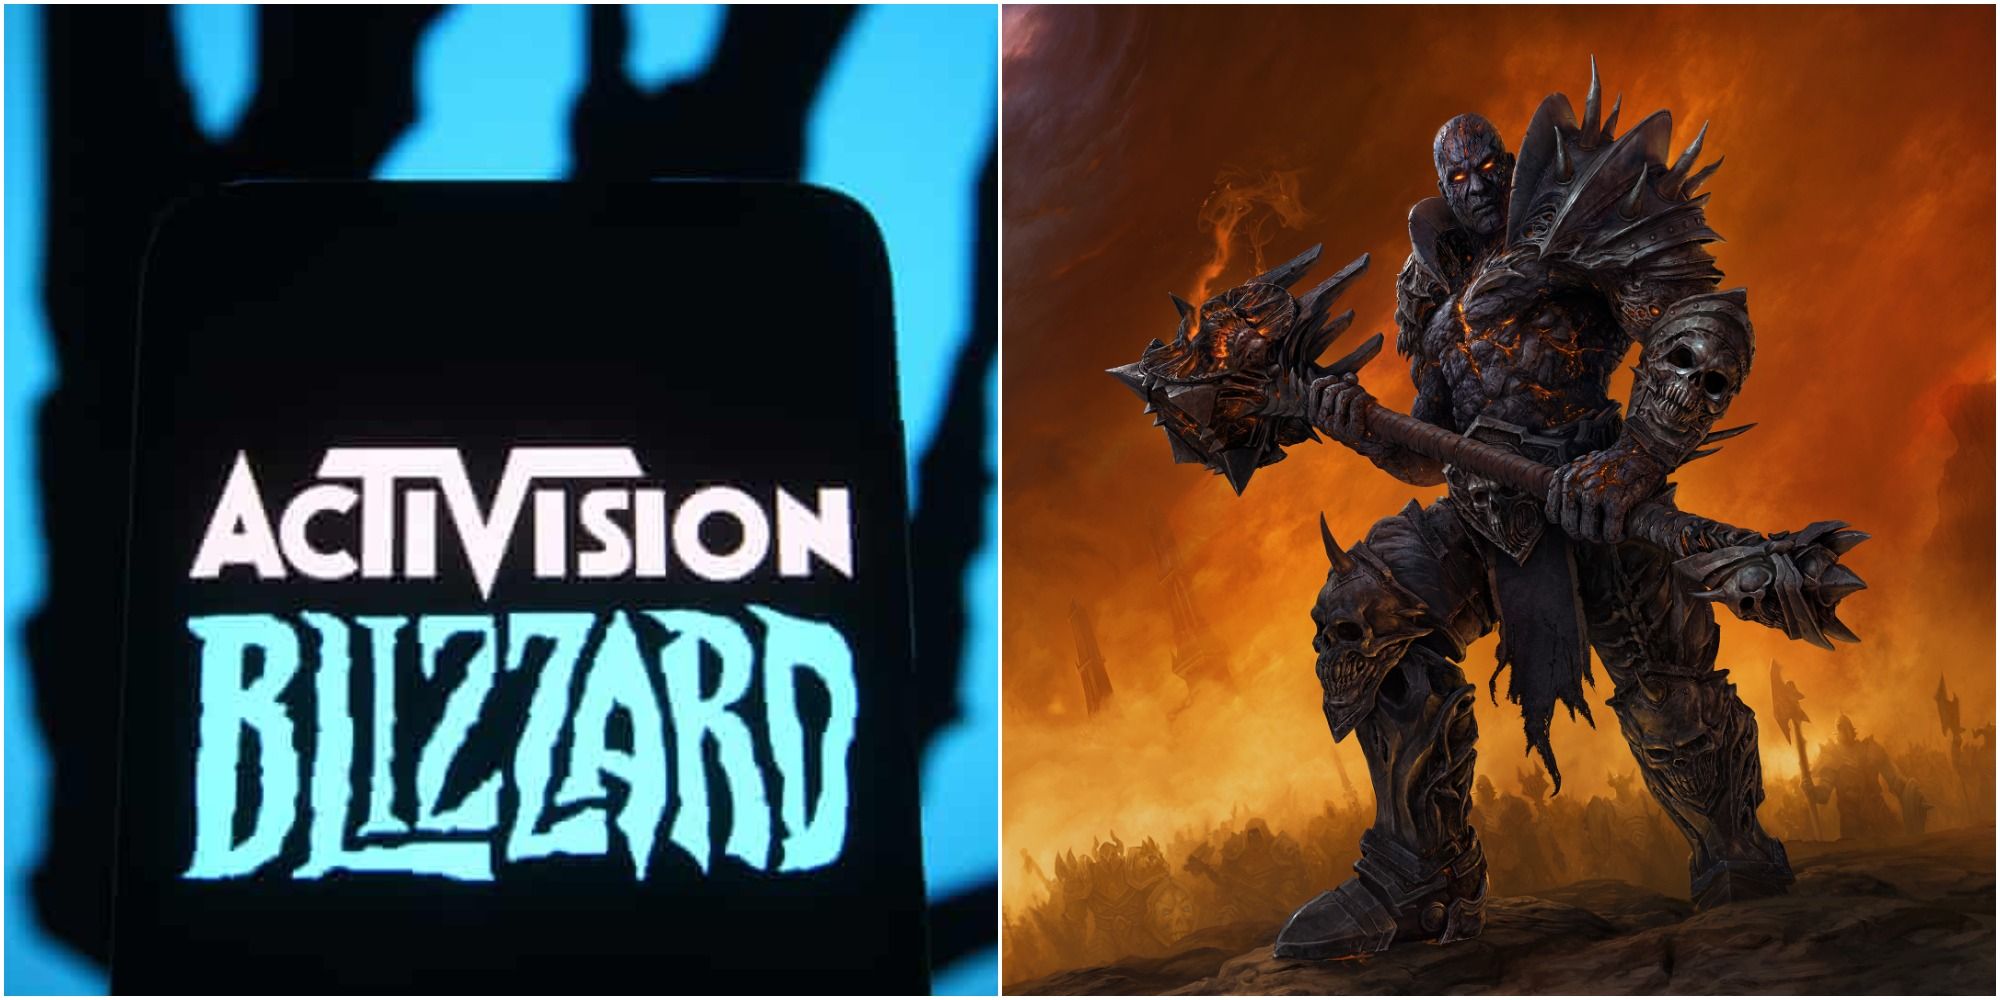 World Of Warcraft Players Are Protesting Against Activision Blizzard InGame